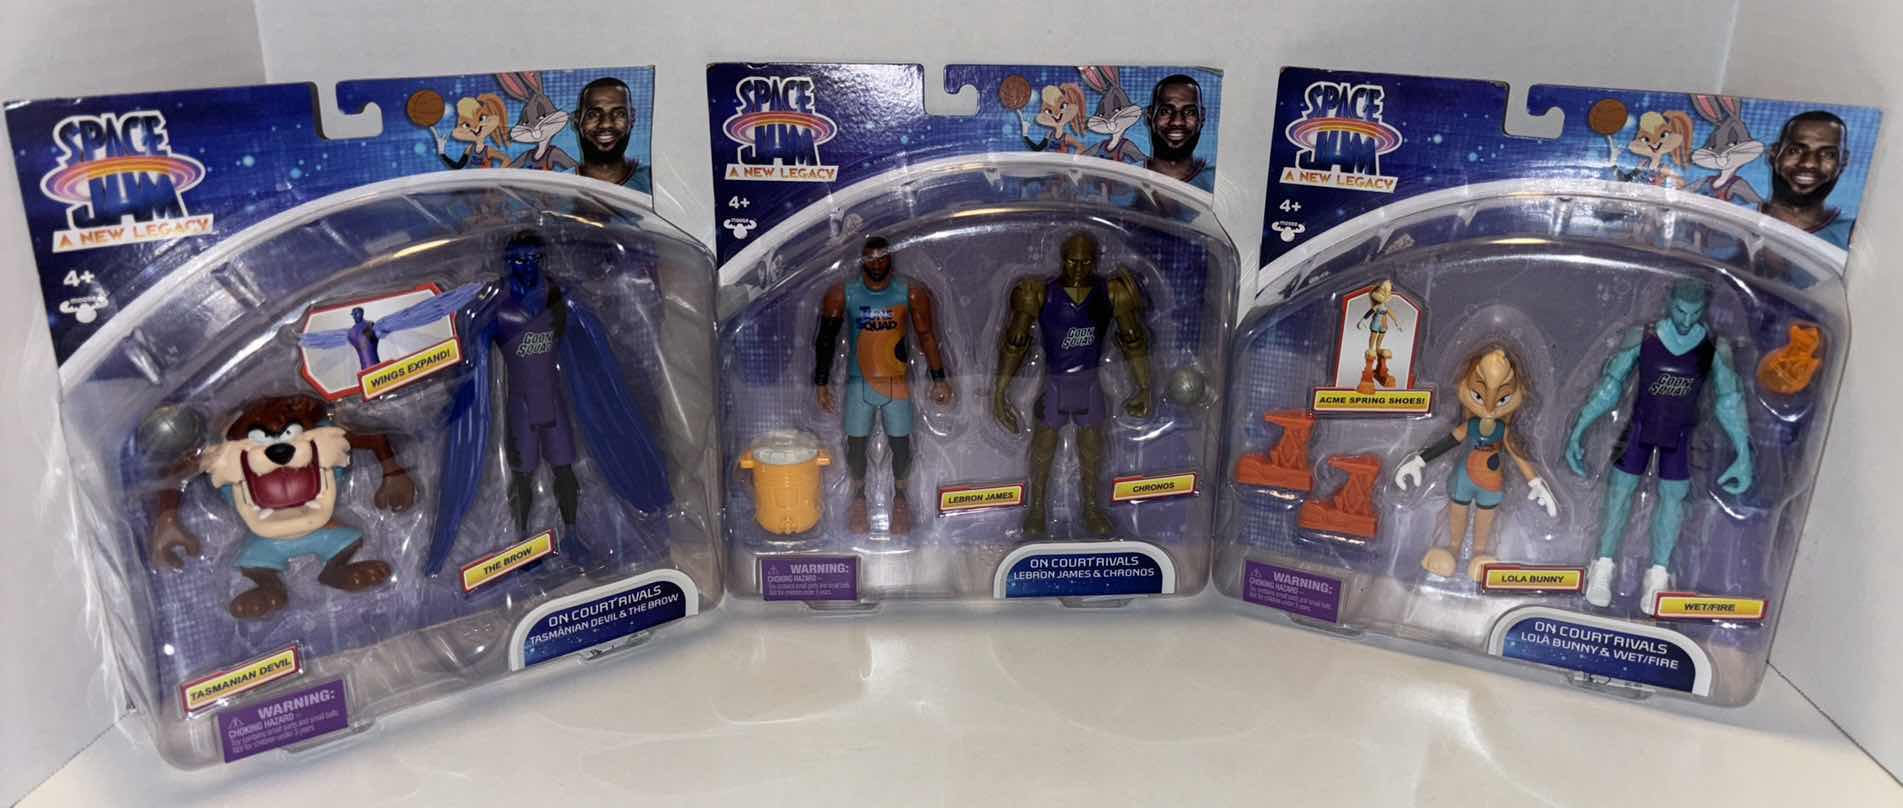 Photo 1 of NEW 3-PACK MOOSE TOYS SPACE JAM A NEW LEGACY ACTION FIGURES & ACCESSORIES, “TASMANIAN DEVIL & THE BROW”, “LEBRON JAMES & CHRONOS” & “LOLA BUNNY & WET/FIRE”